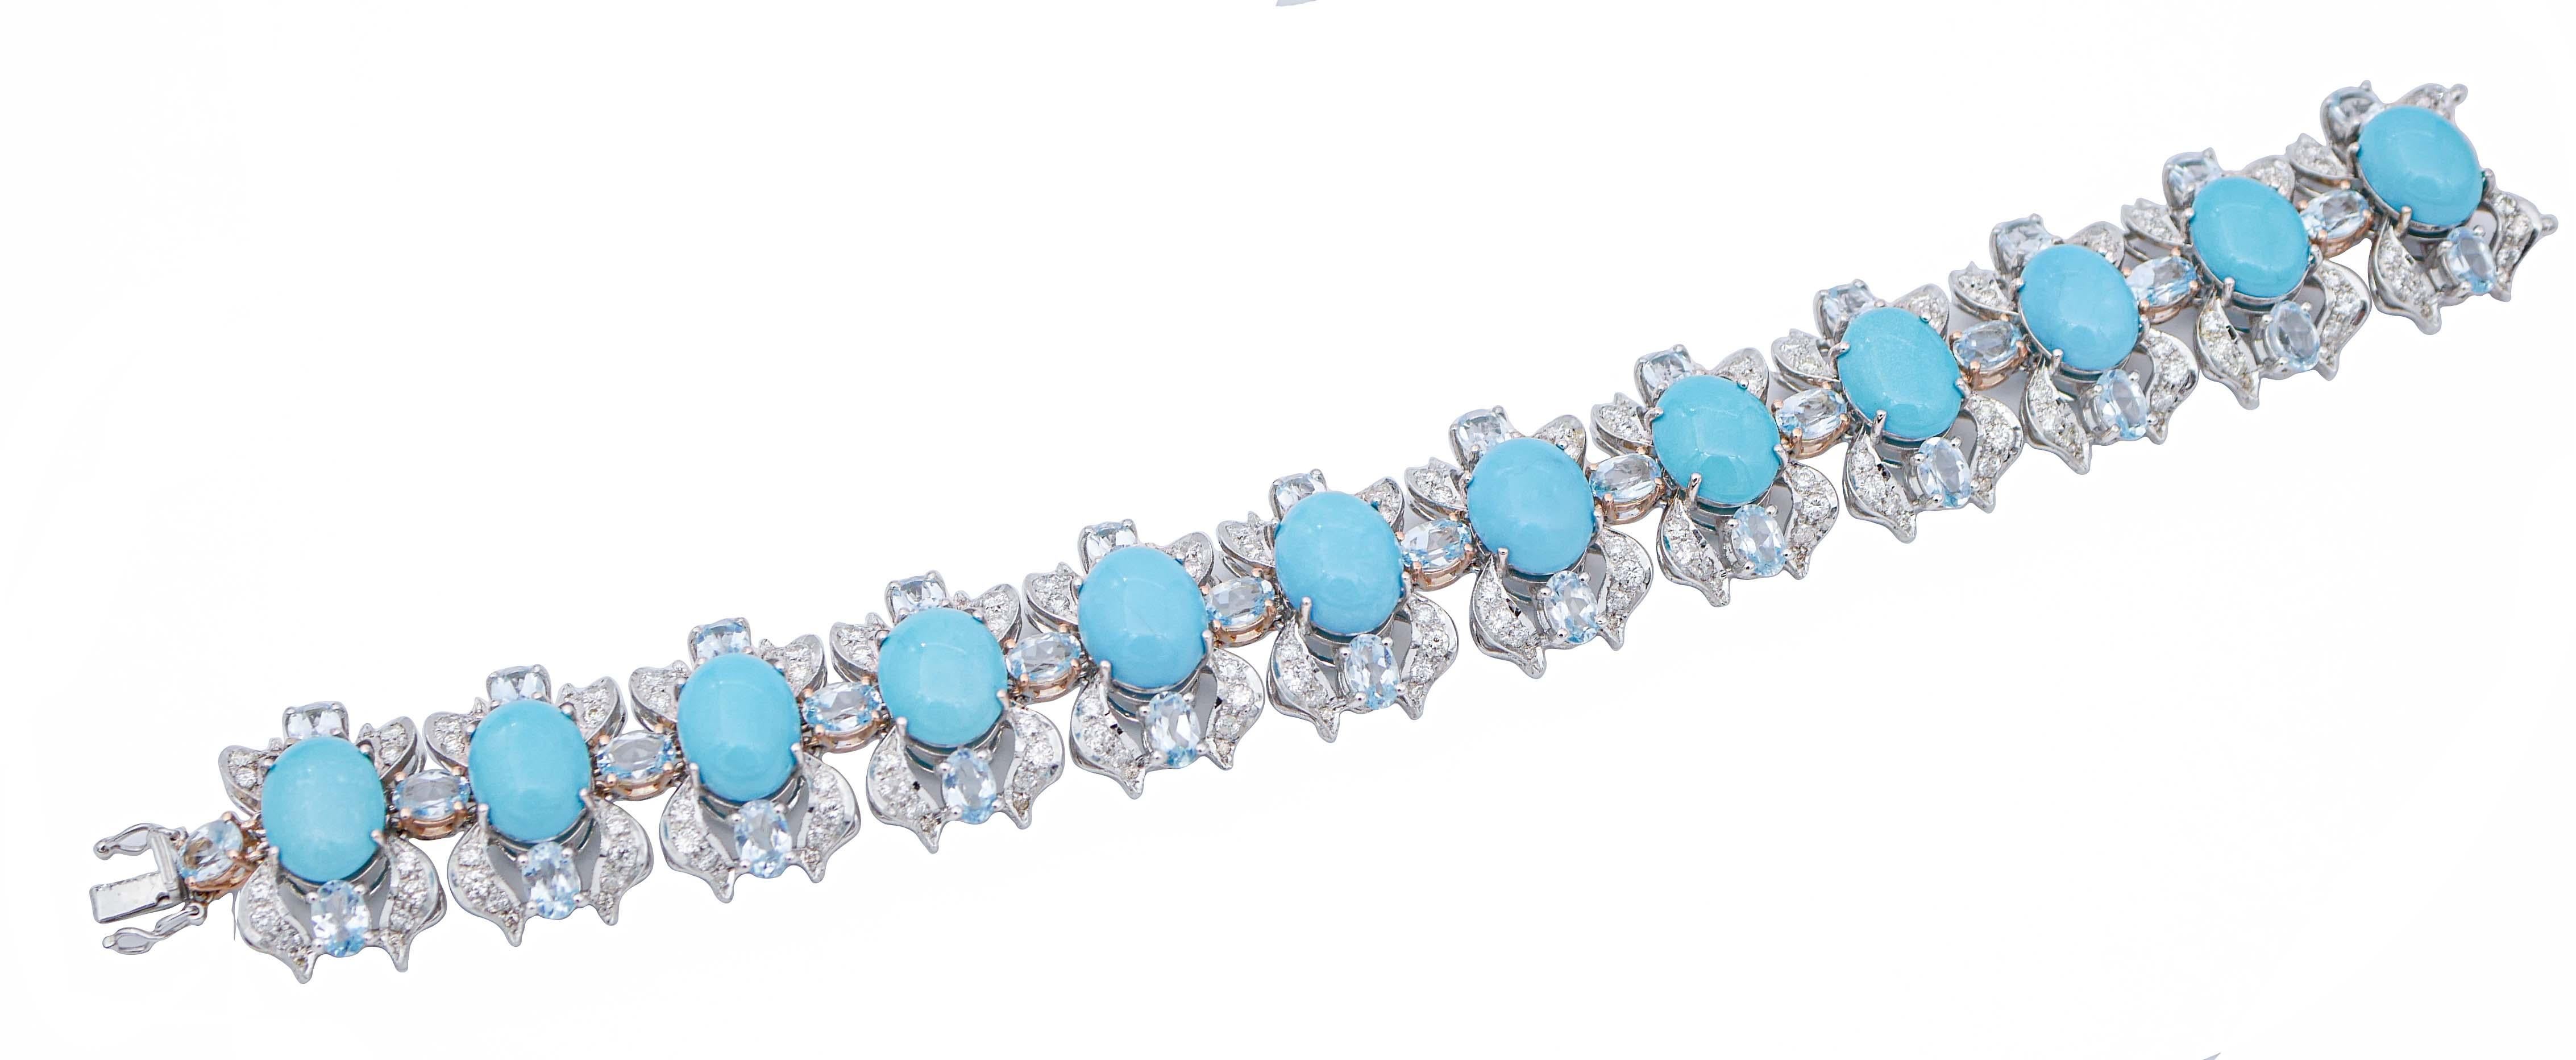 SHIPPING POLICY:
No additional costs will be added to this order.
Shipping costs will be totally covered by the seller (customs duties included).

Beautiful bracelet in 14 kt white gold structure mounted of 12 sections with an oval turquoise